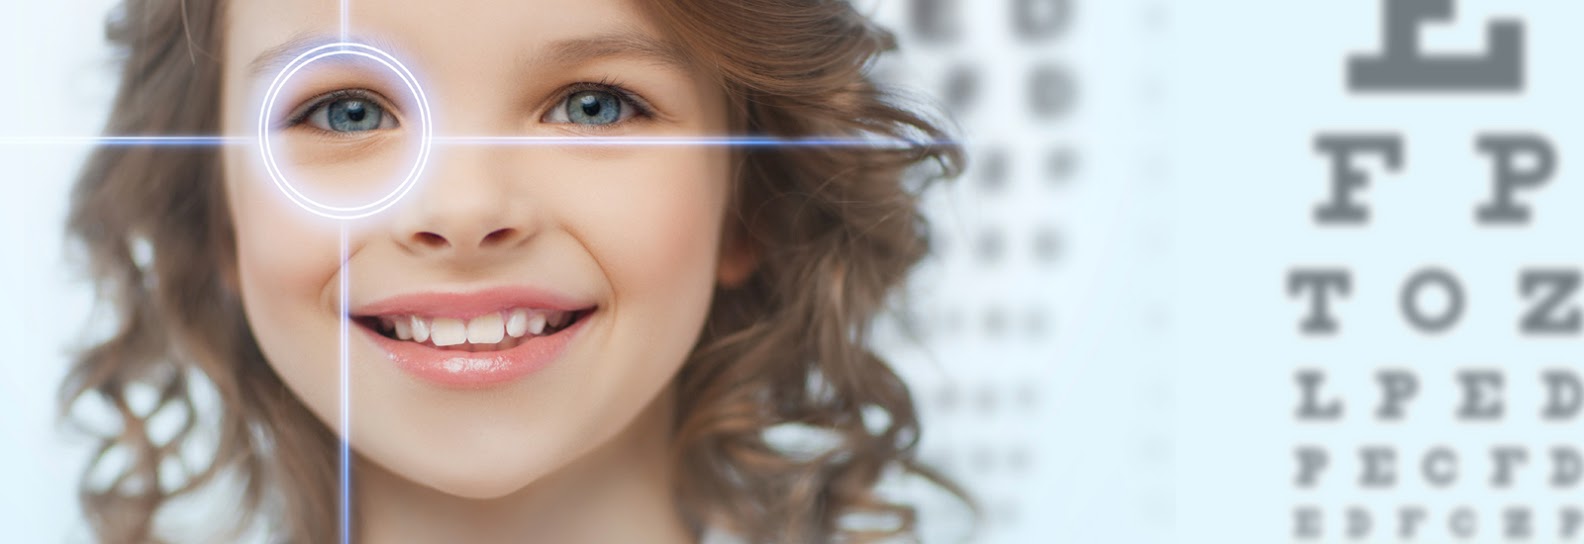 Novel Eye Drop Administration Techniques for pediatric phthalmology. Image depicts a young female child with a target over one eye and a vision test target in the backgroung